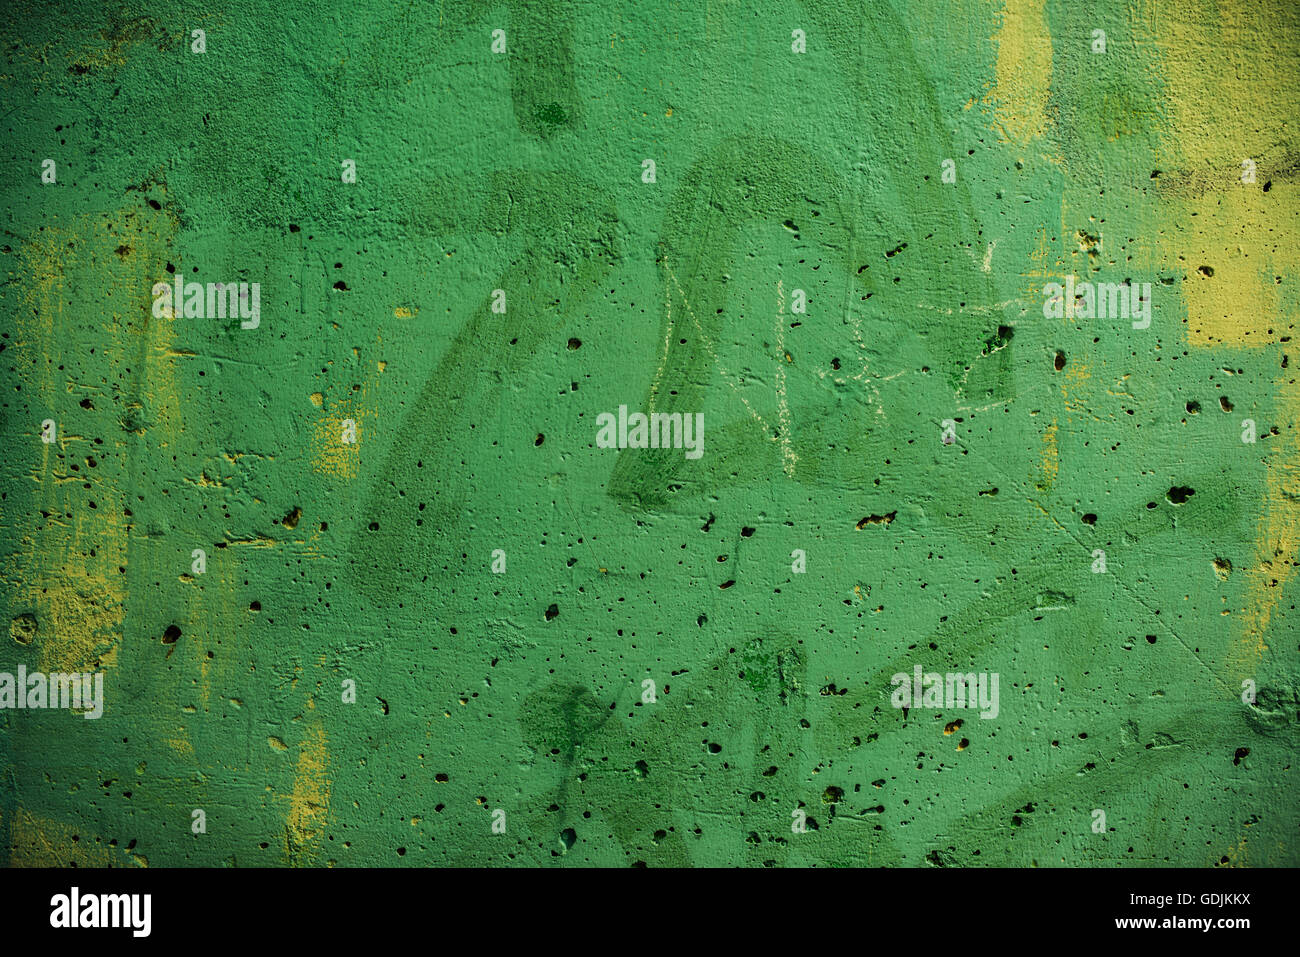 Green painted concrete wall texture, urban background Stock Photo